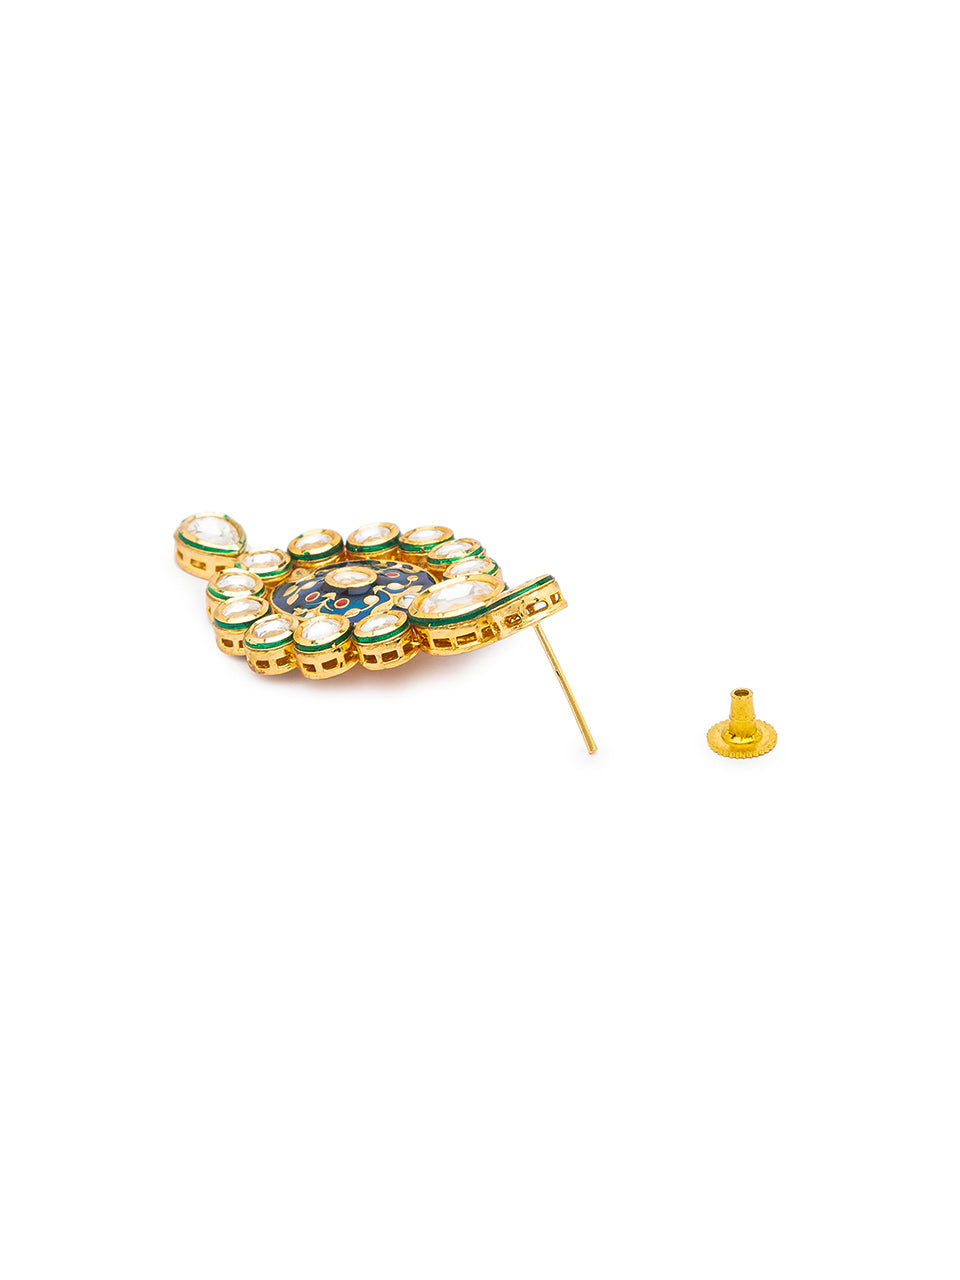 Pair of Earring with Gold Polished Brass, & Meenakari